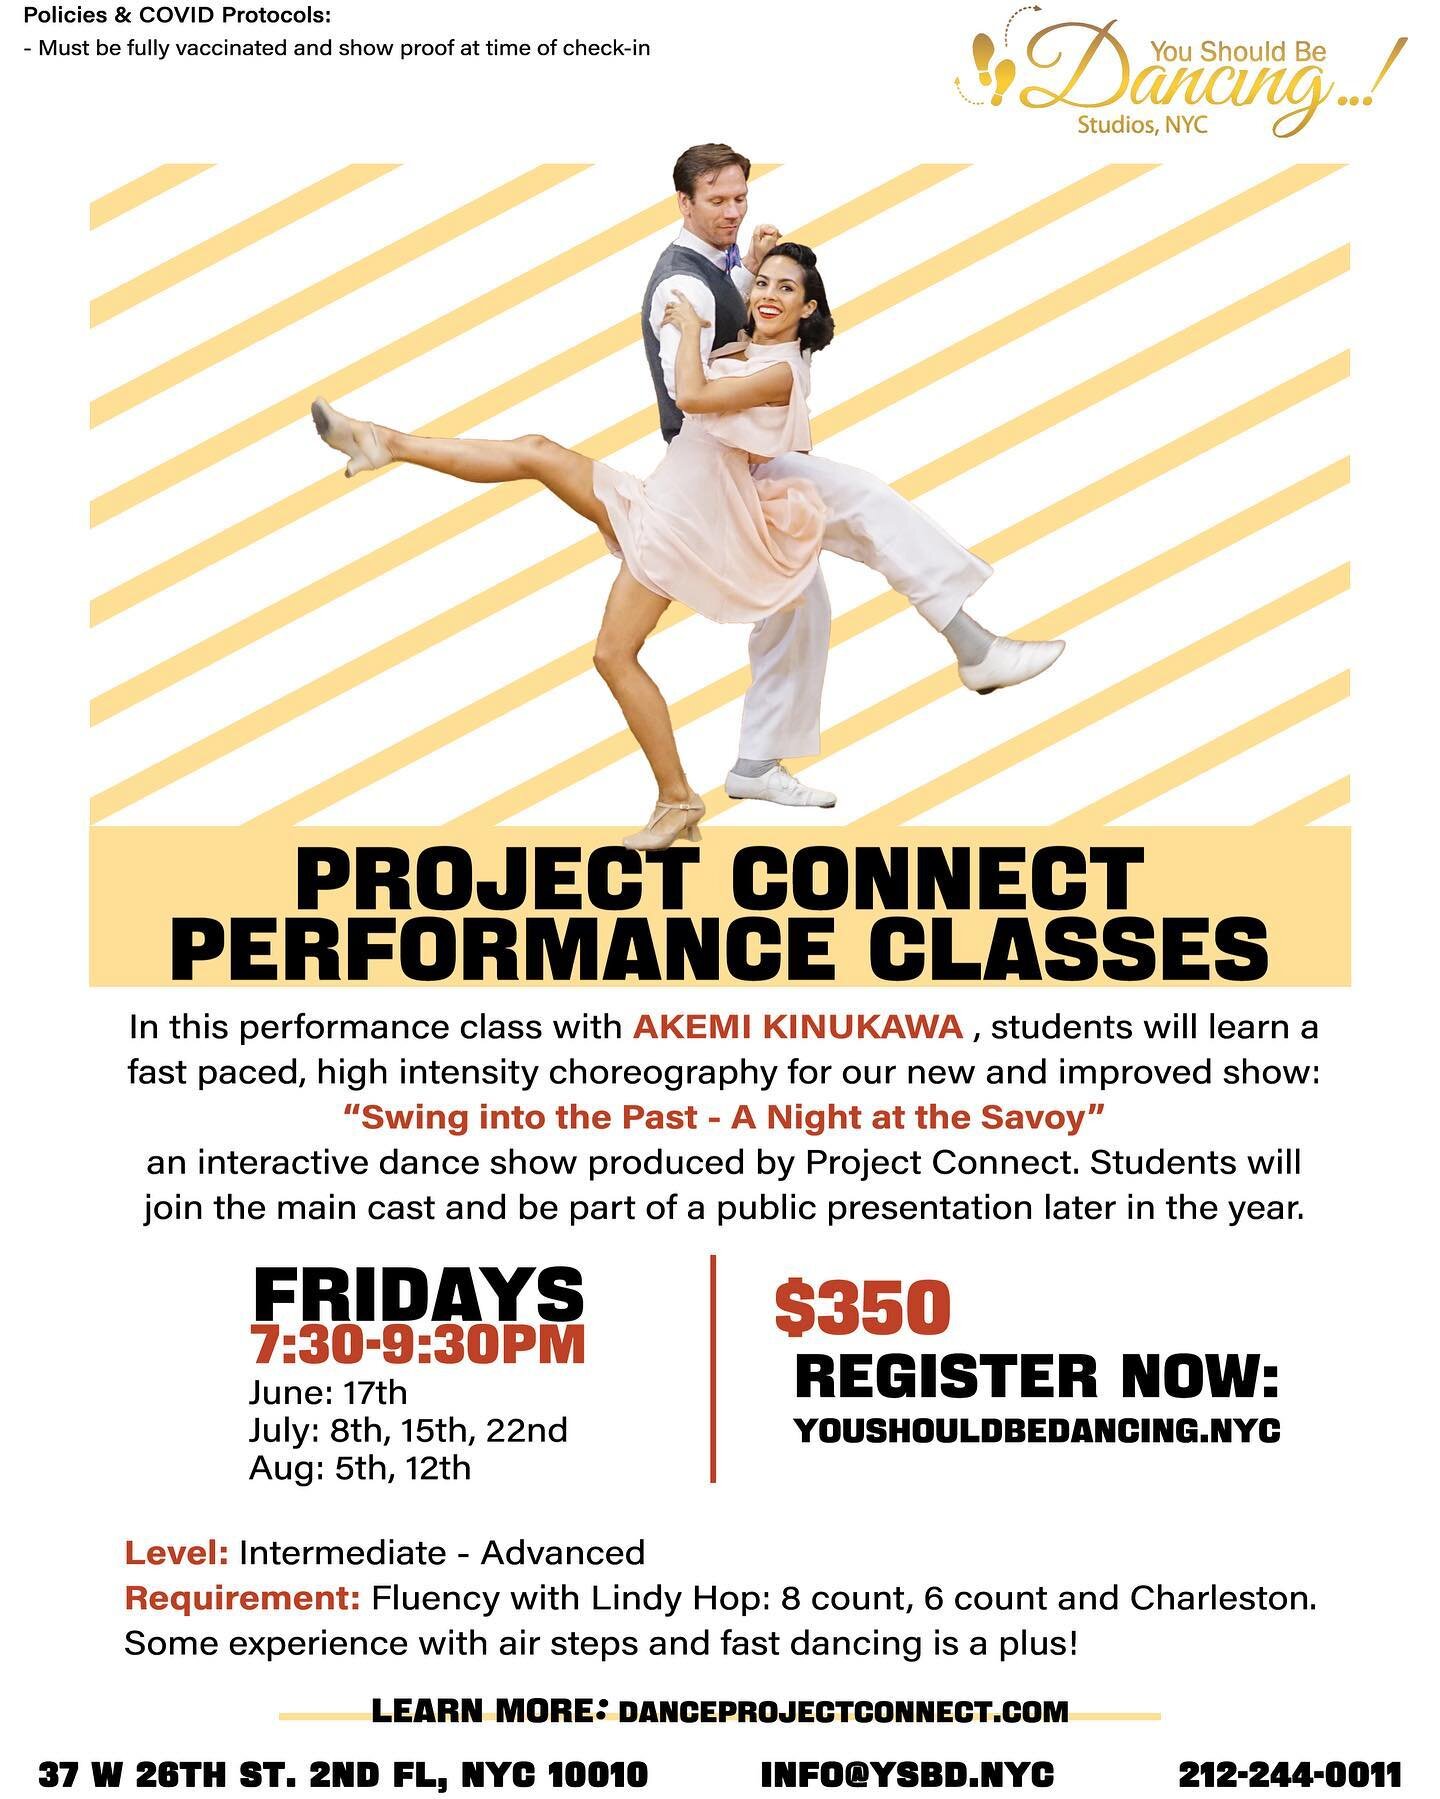 Project Connect is back! 

Requirement: Fluency with Lindy Hop moves including 8 count, 6 count and Charleston. Some experience with air steps and fast dancing is a plus!

In this performance class, students will learn a fast paced, high intensity ch